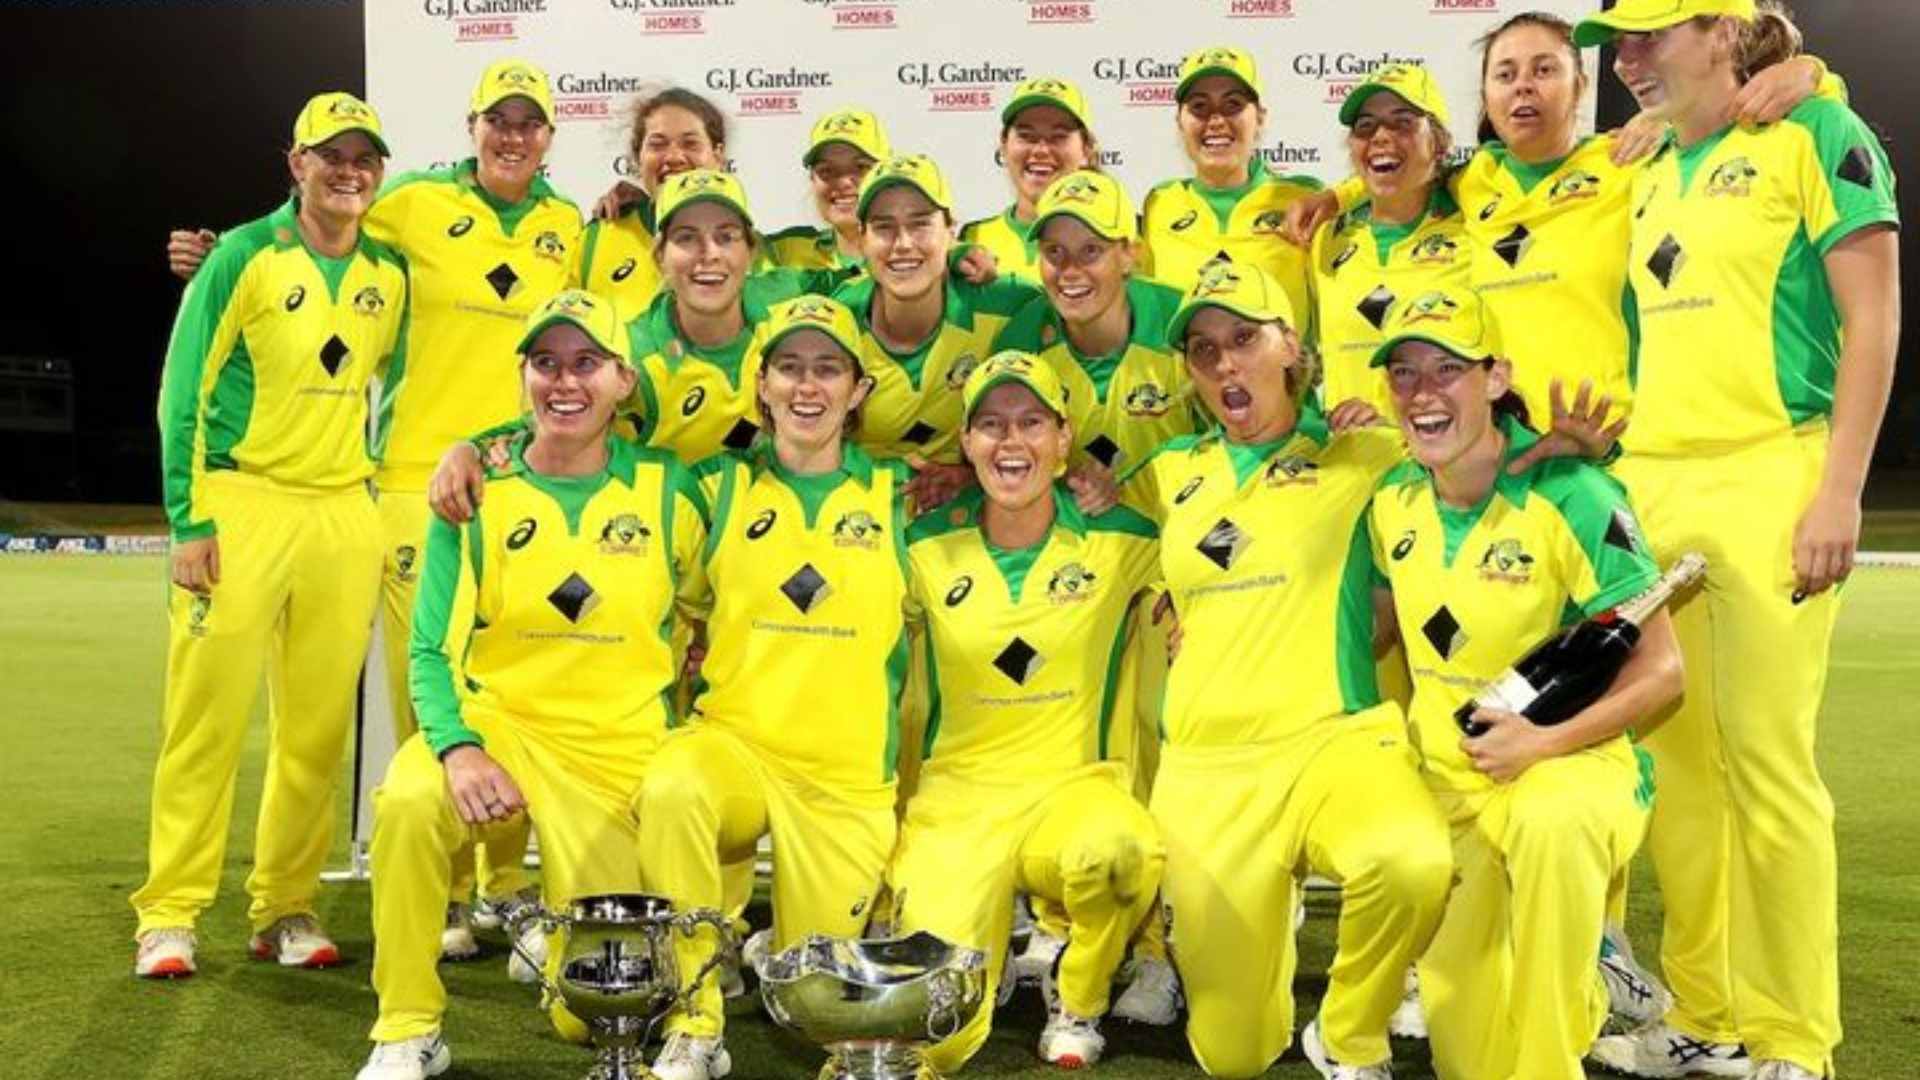 The Australia women's cricket team not just whitewashed New Zealand, but they managed to register their 24th straight win in an ODI.